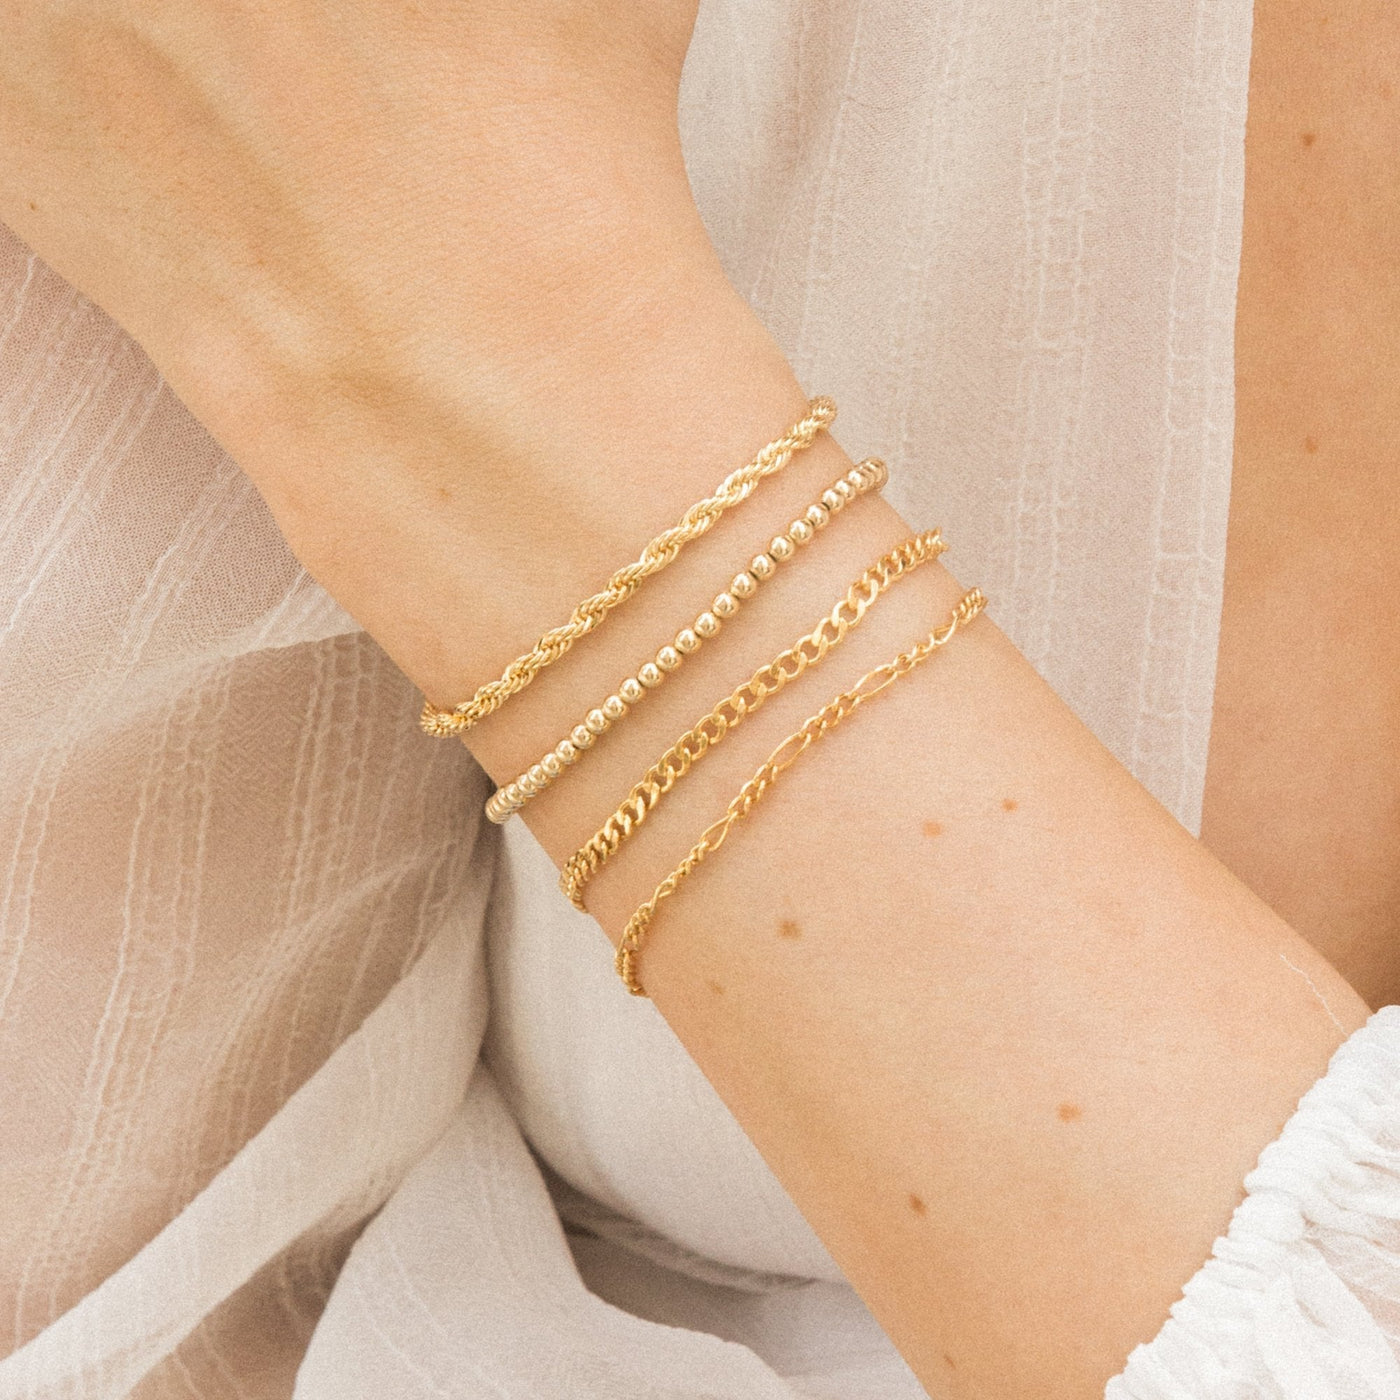 Chunky Rope Chain Bracelet by Simple & Dainty Jewelry